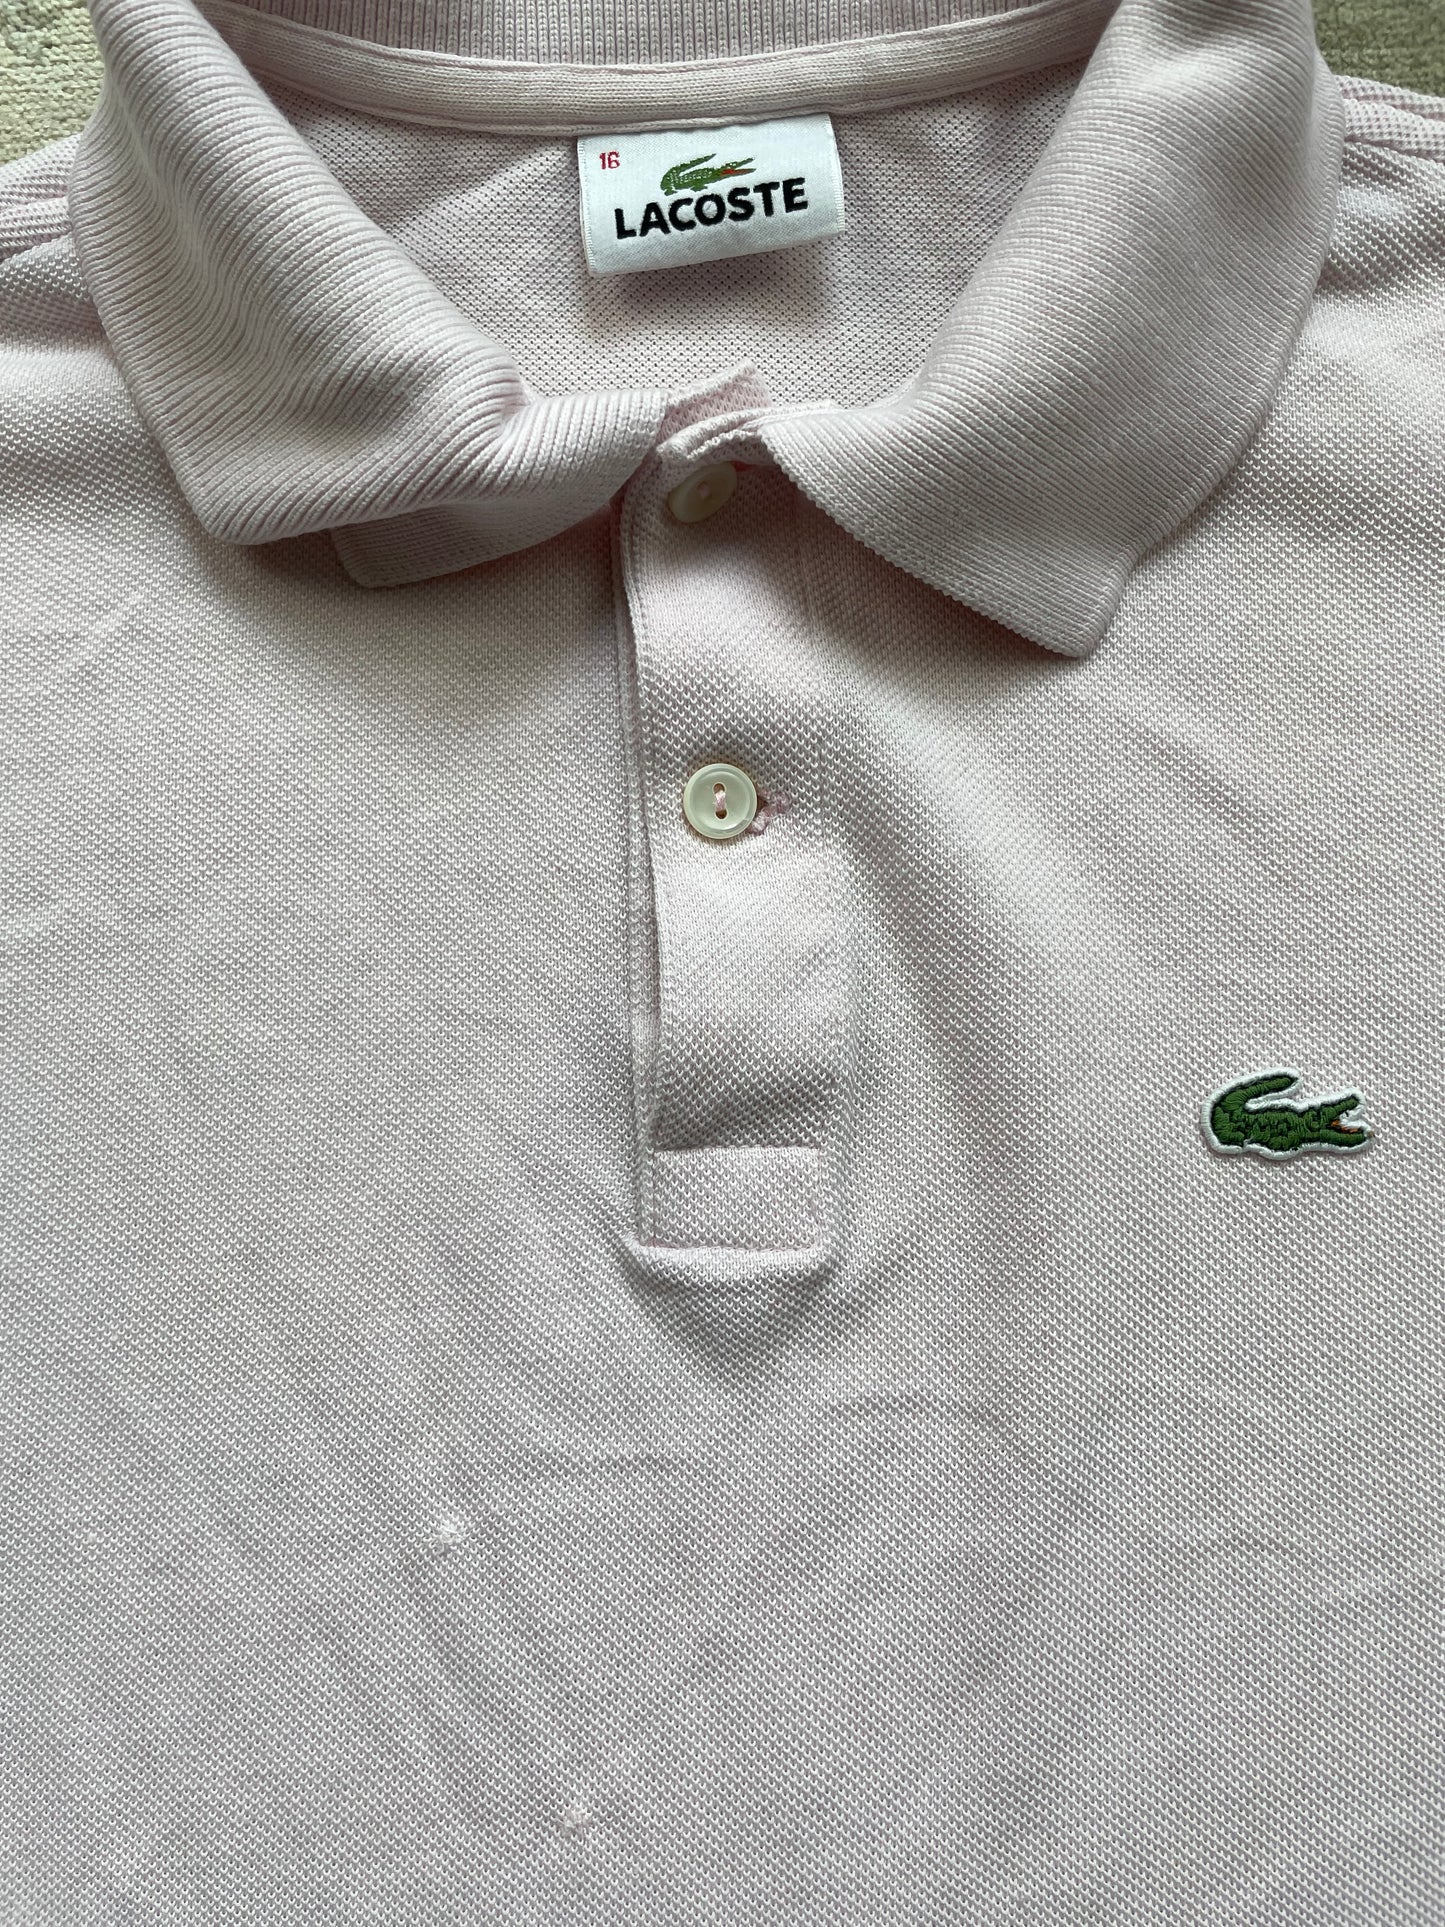 LACOSTE POLO SHIRT PINK (XS)